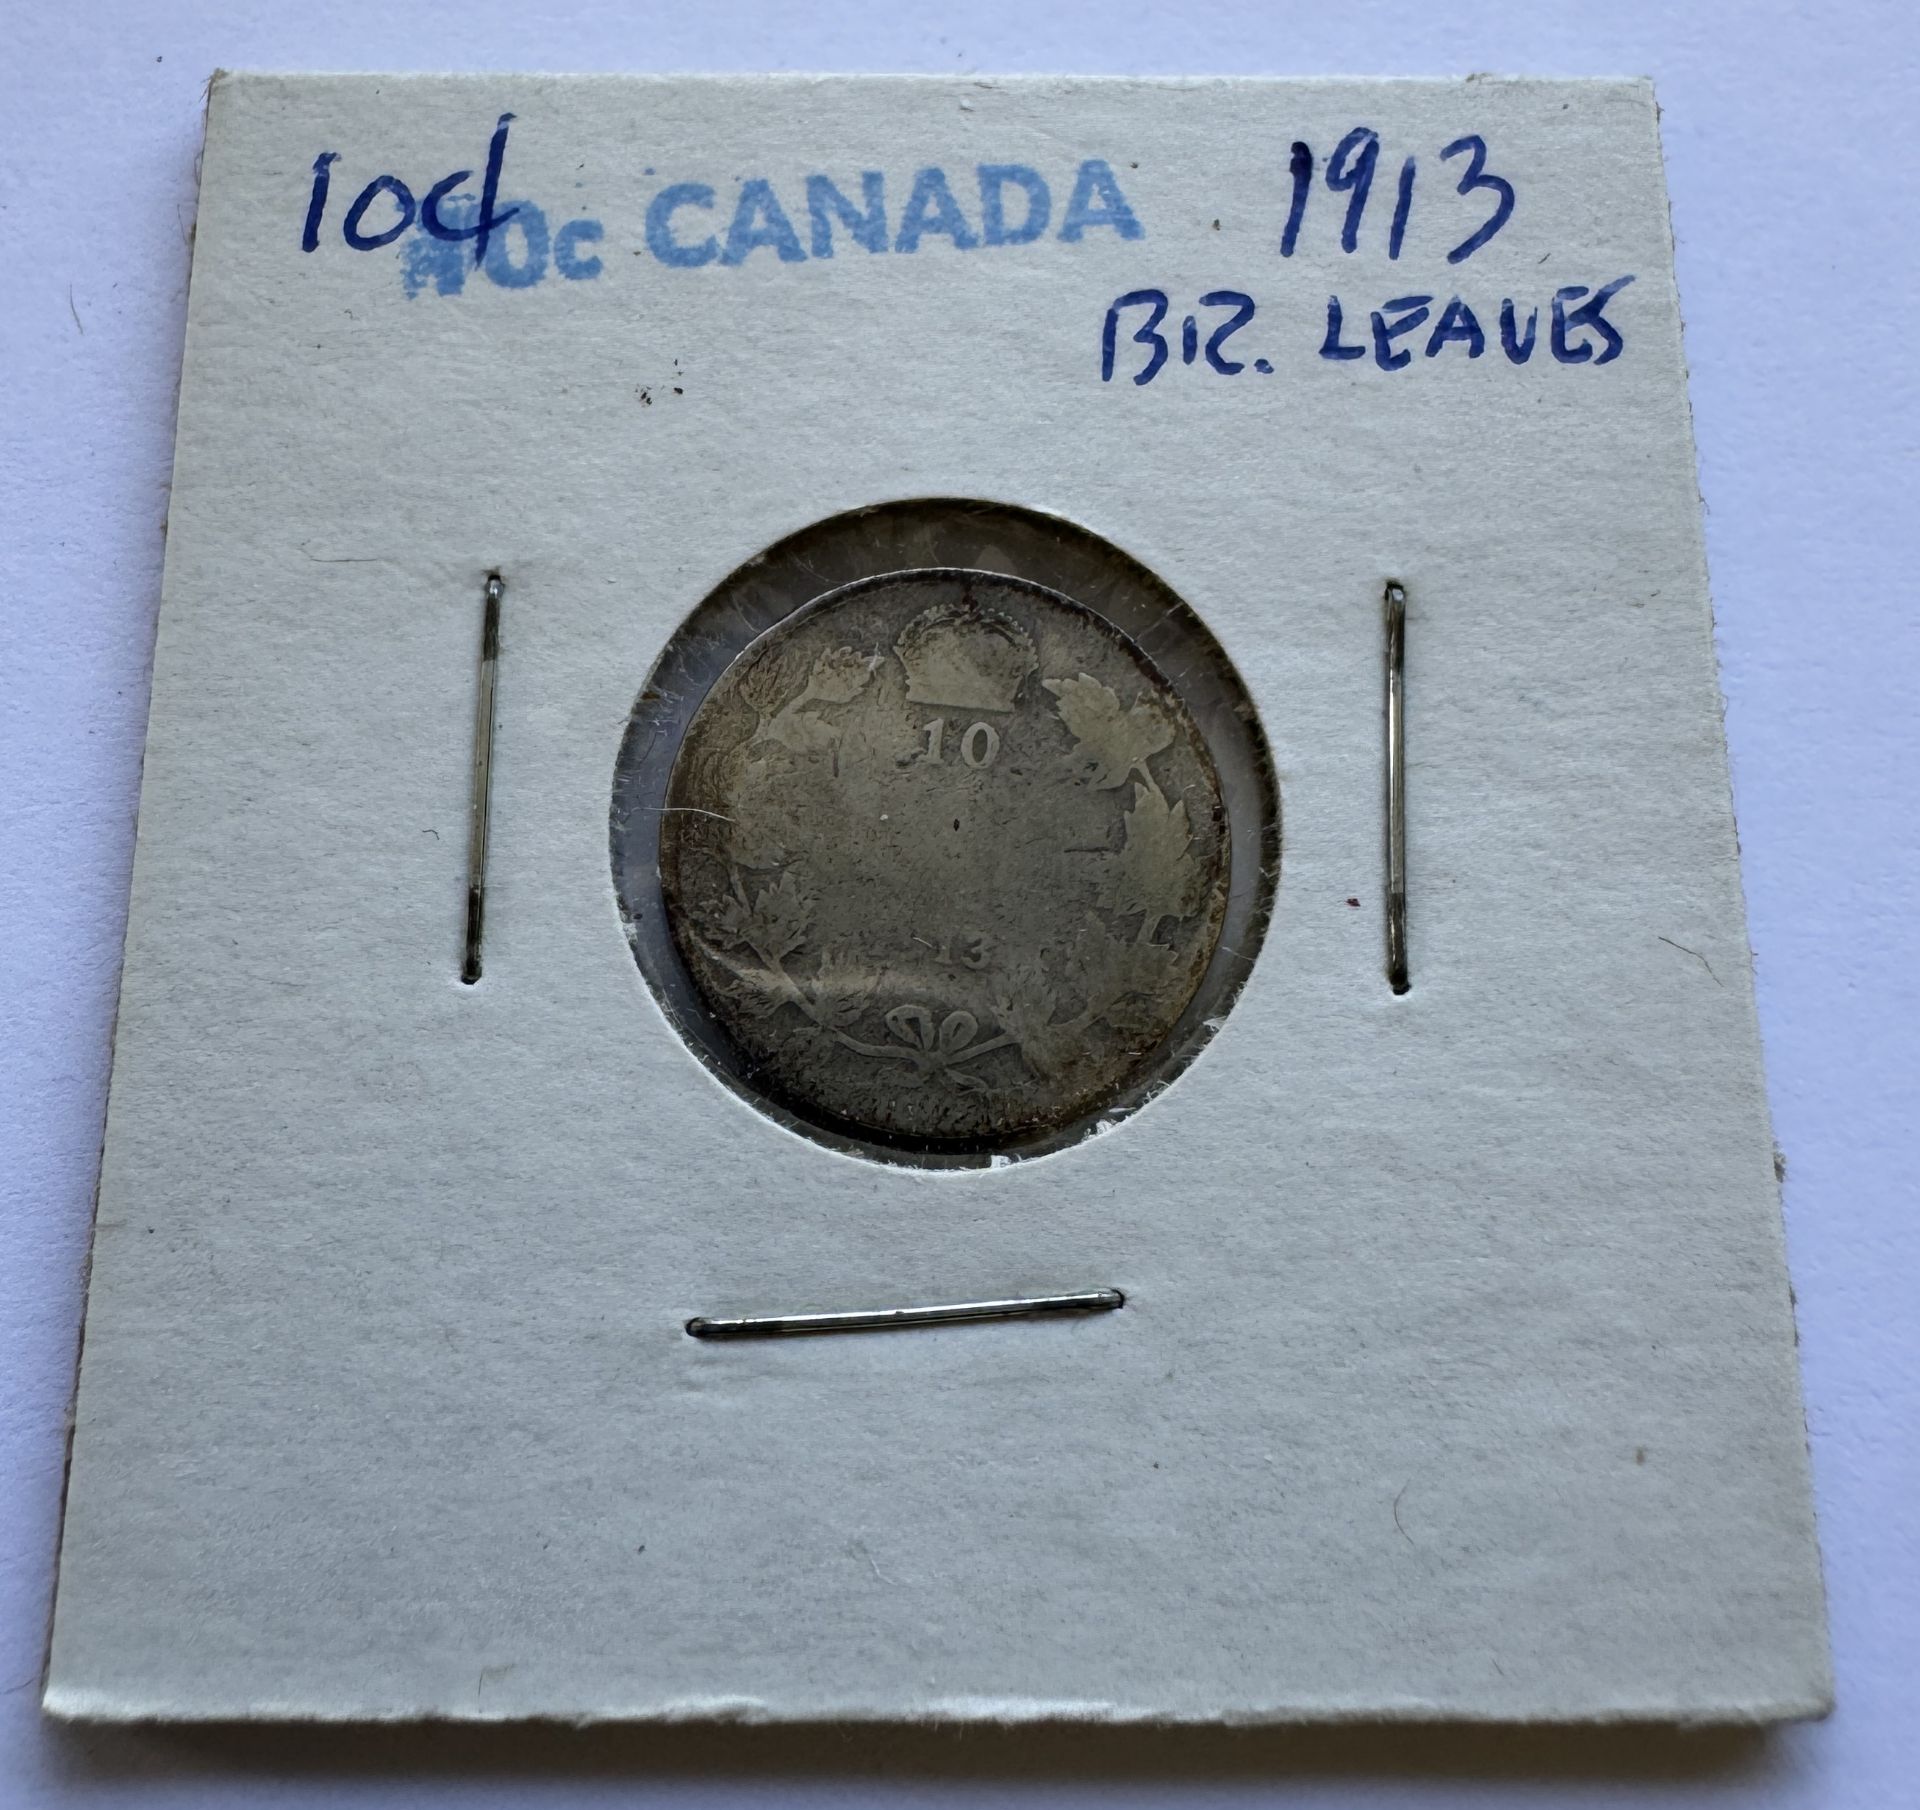 1913 CANADA 10 CENTS GEORGE V COIN